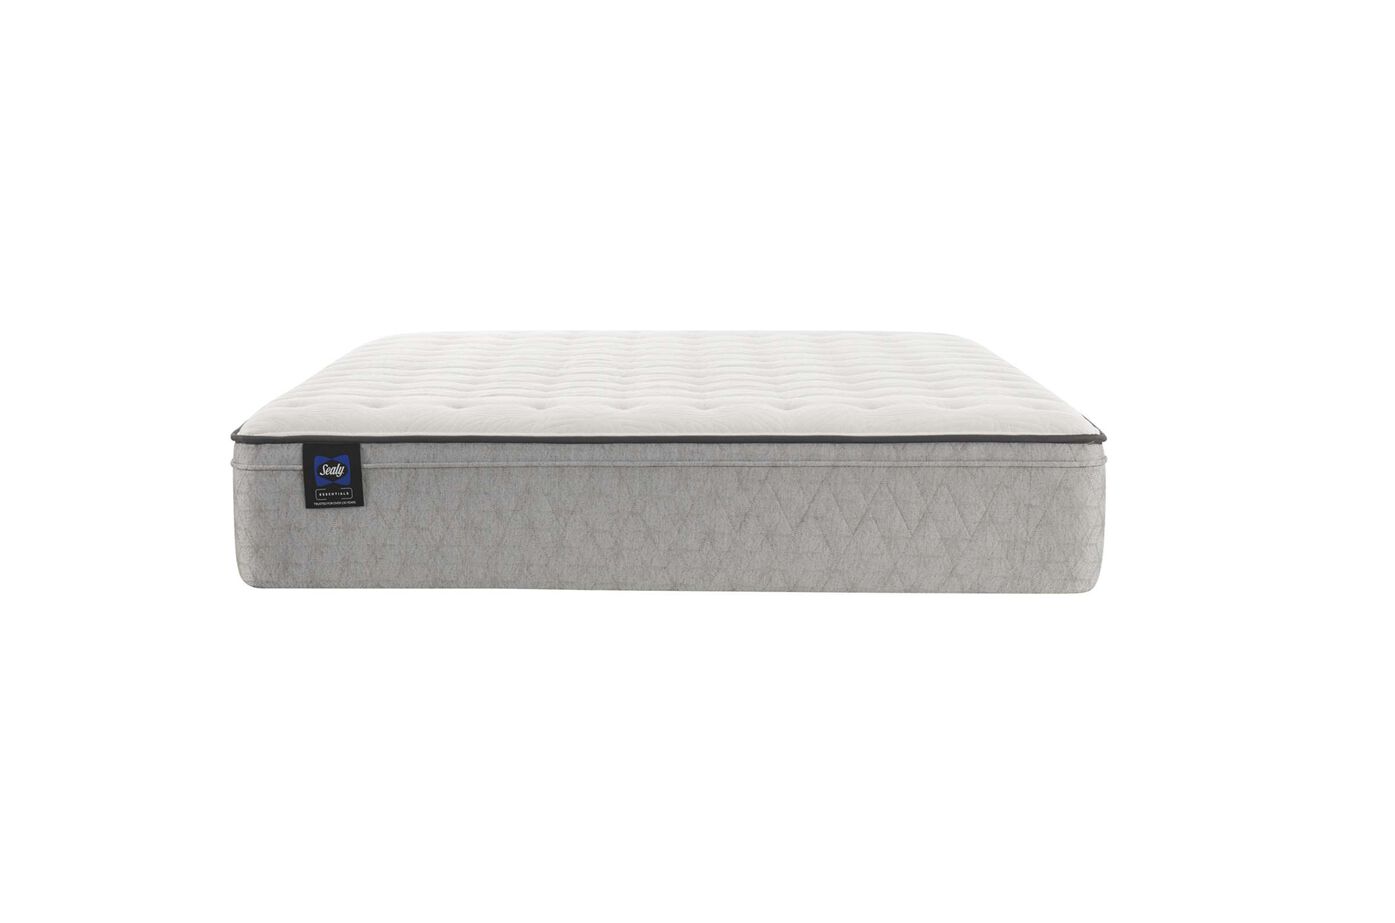 Sealy Essentials Winter Green Soft Euro Top Mattress 12" image number 2